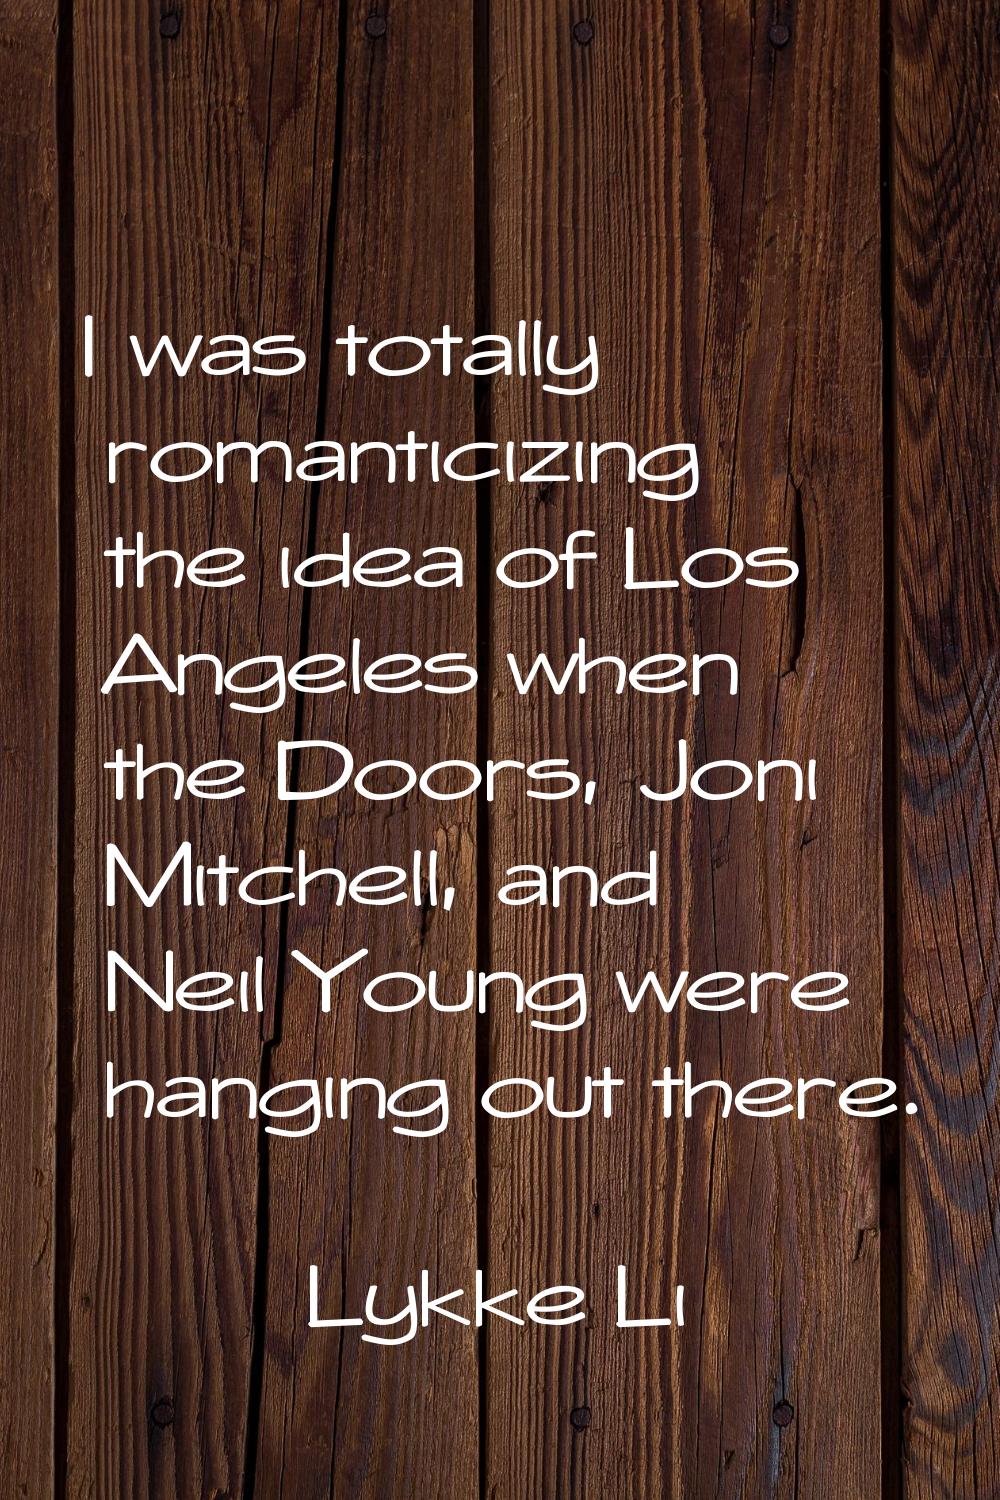 I was totally romanticizing the idea of Los Angeles when the Doors, Joni Mitchell, and Neil Young w